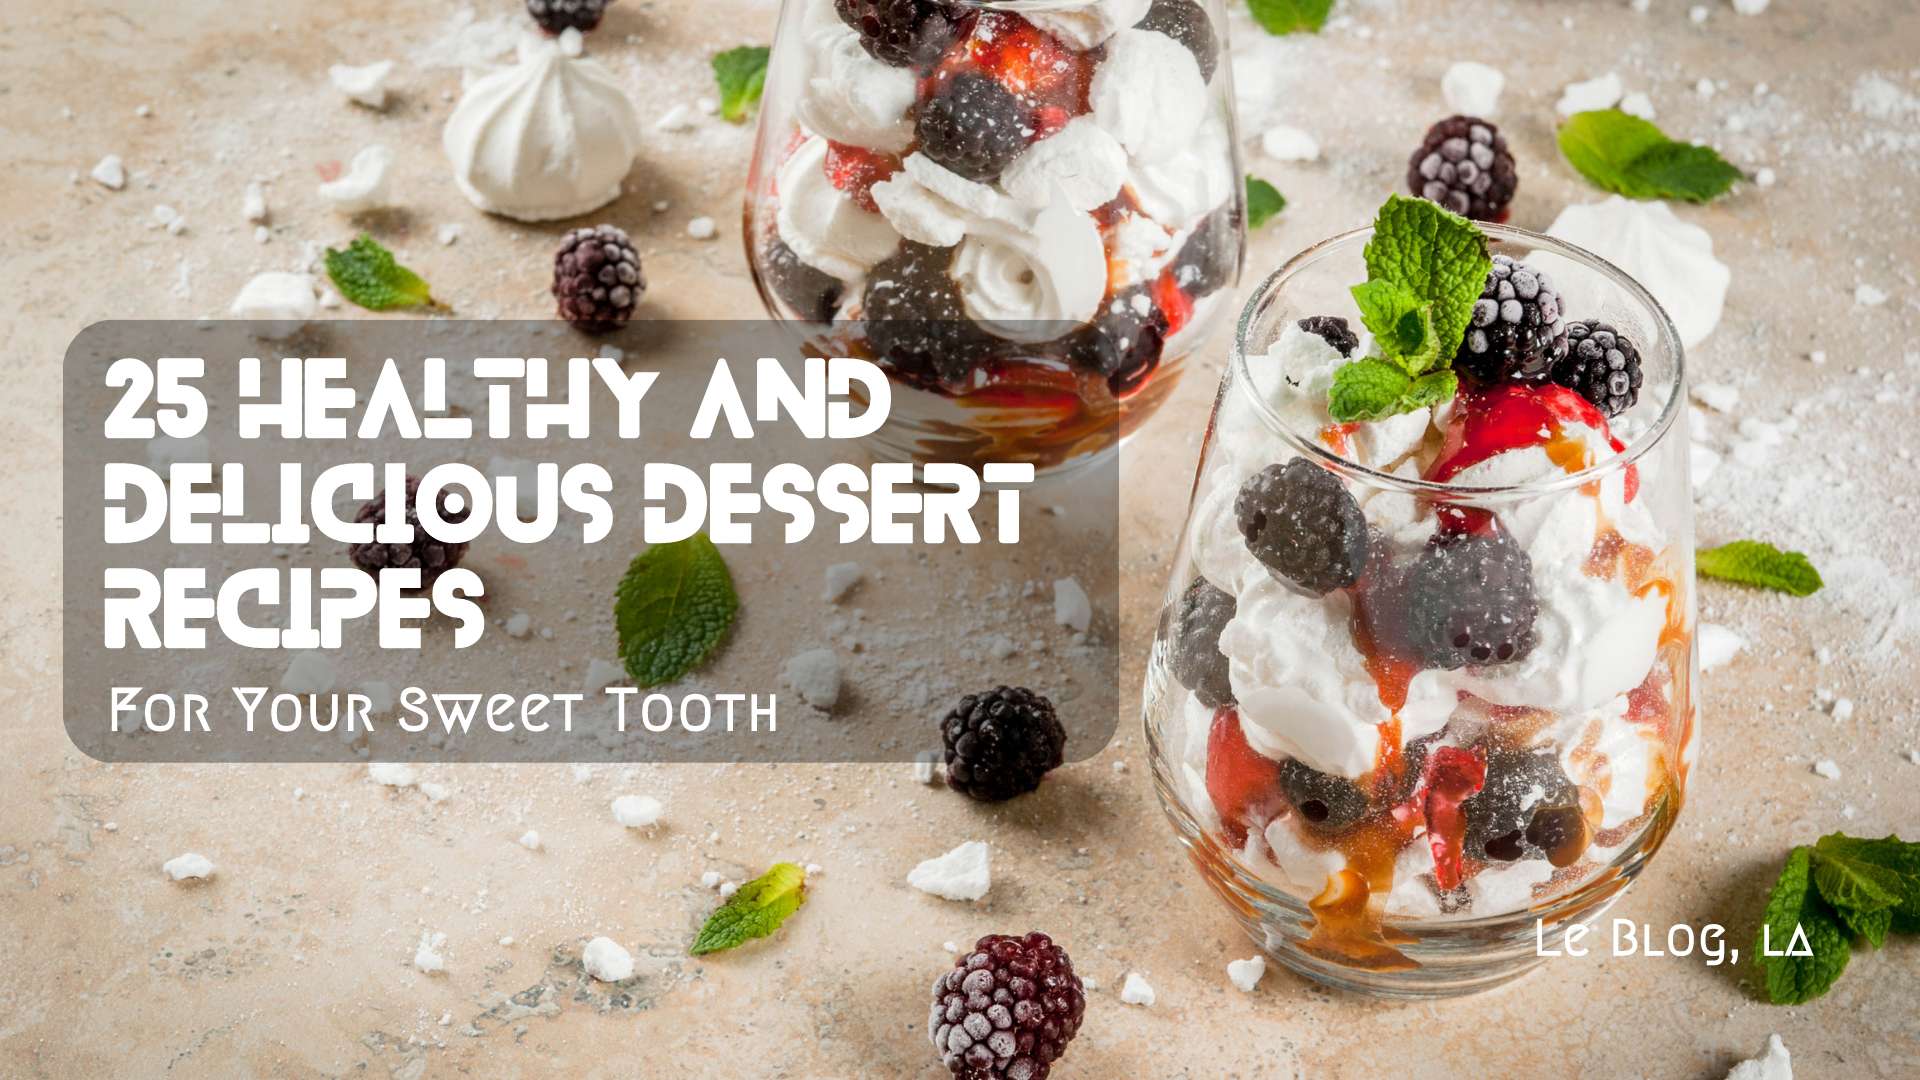 25 Healthy and Delicious Dessert Recipes for Your Sweet Tooth